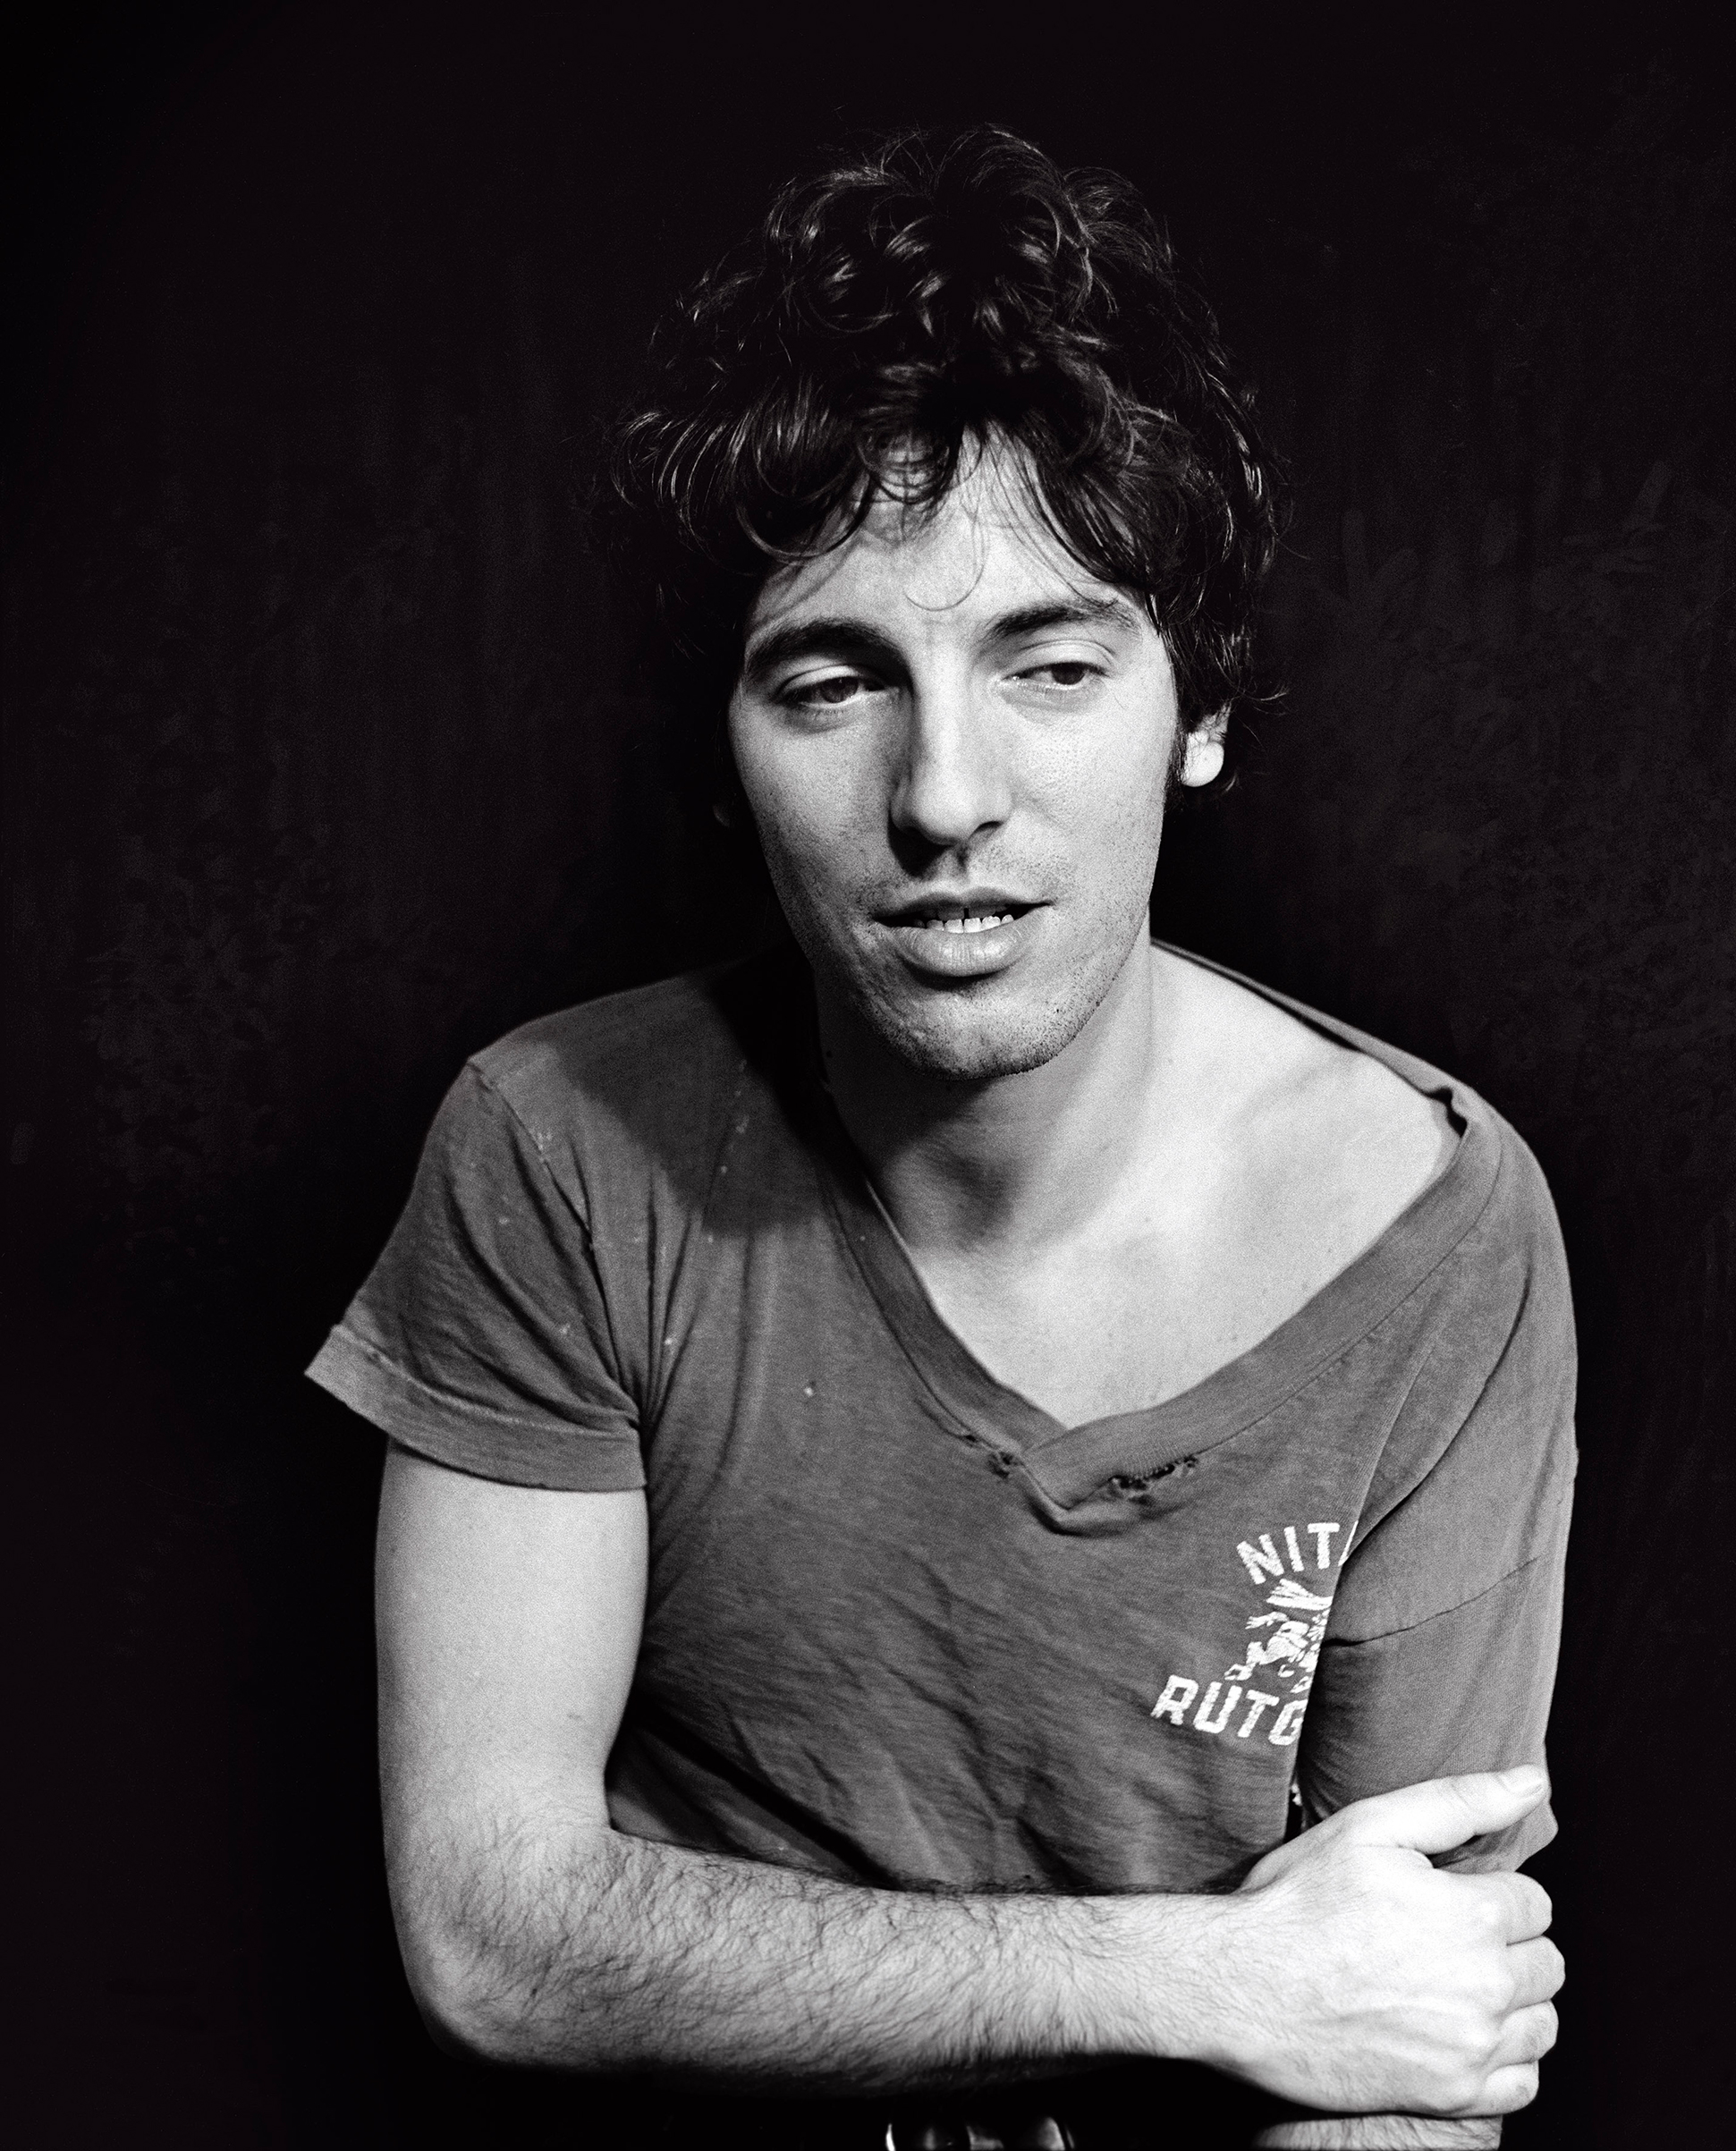 Bruce Springsteen wearing a torn, worn out Rutgers University T-shirt for the Darkness box set, 1978.